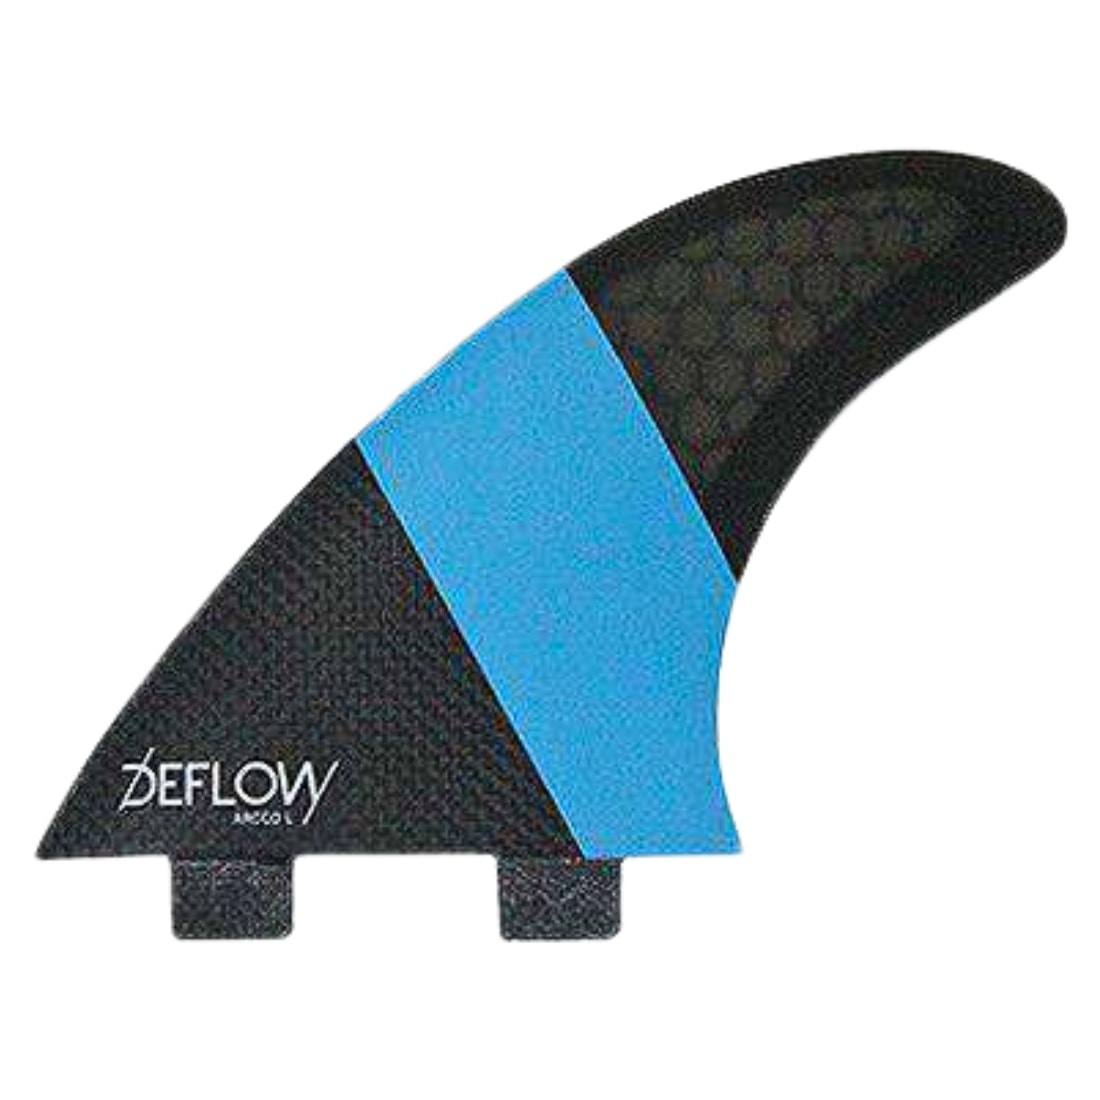 Deflow Arcco Large Fcs Compatible Thruster Fins - Black/Blue - FCS 1 Fins by Deflow Large Fins